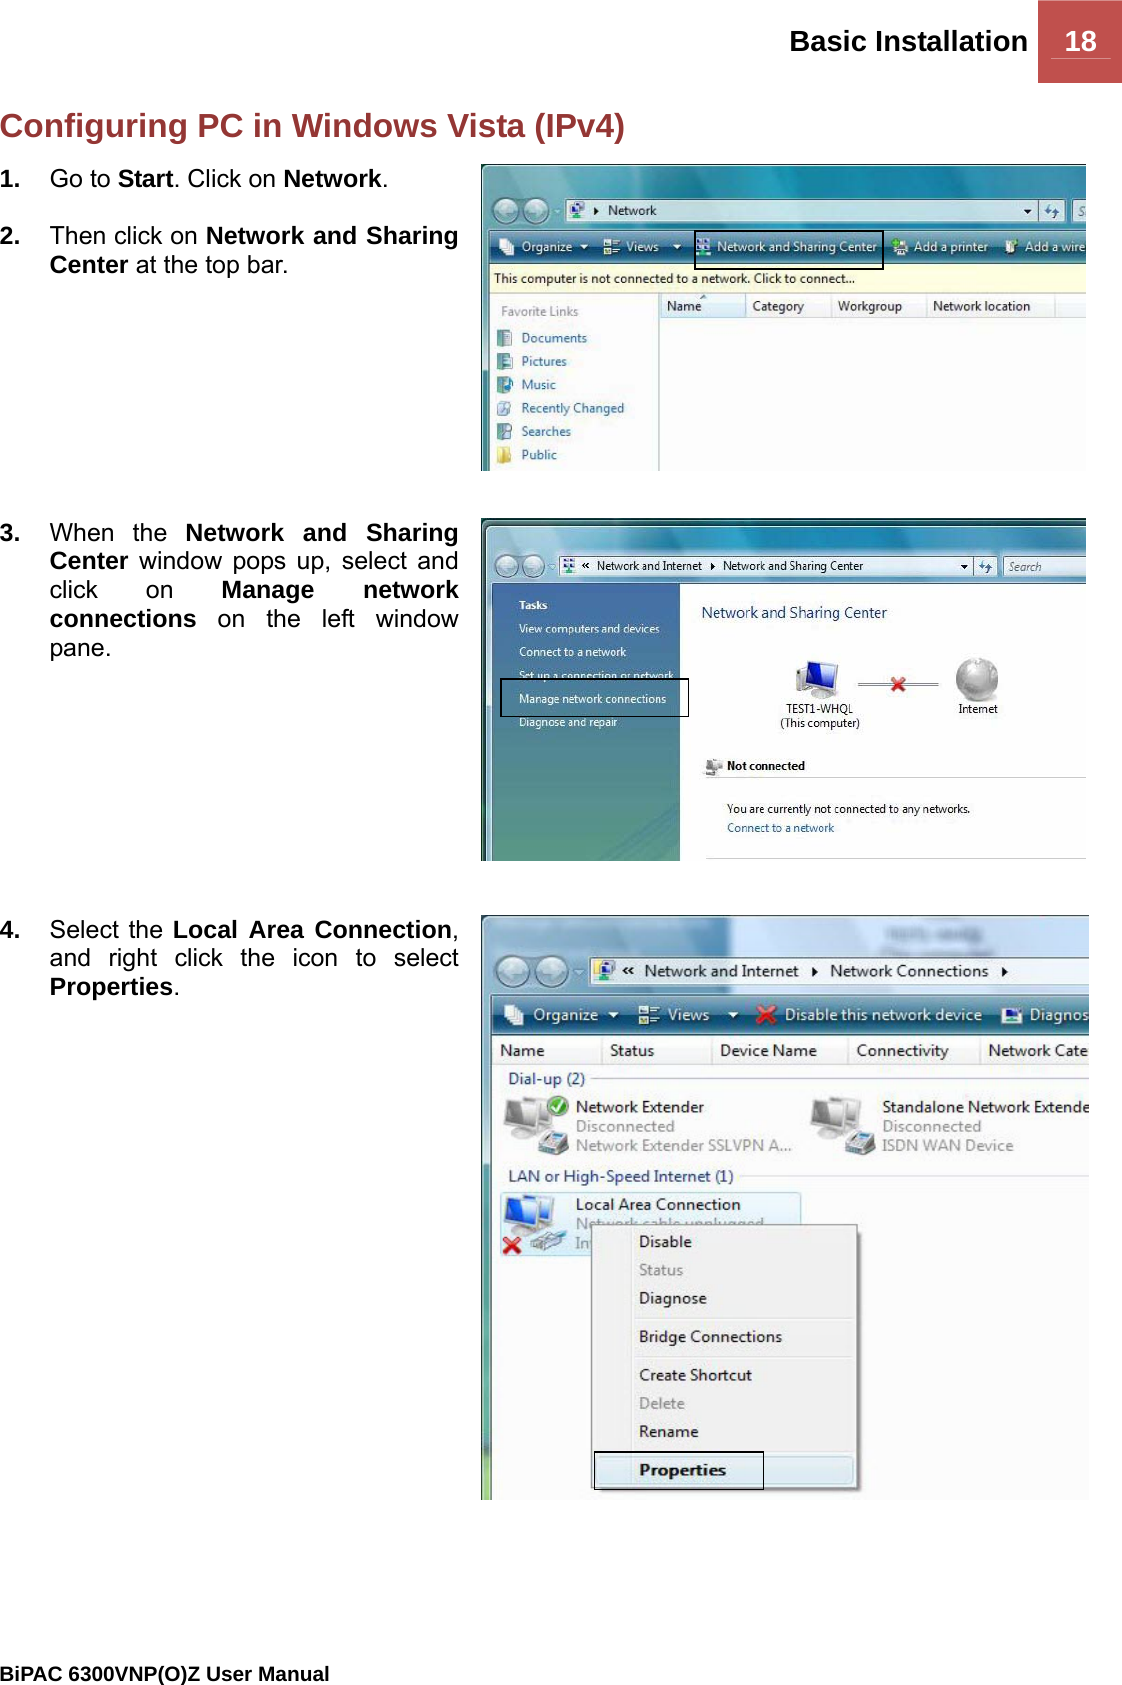 Basic Installation 18                                                BiPAC 6300VNP(O)Z User Manual  Configuring PC in Windows Vista (IPv4)  1.  Go to Start. Click on Network.  2.  Then click on Network and Sharing Center at the top bar.  3.  When the Network and Sharing Center window pops up, select and click on Manage network connections on the left window pane.  4.  Select the Local Area Connection, and right click the icon to select Properties. 